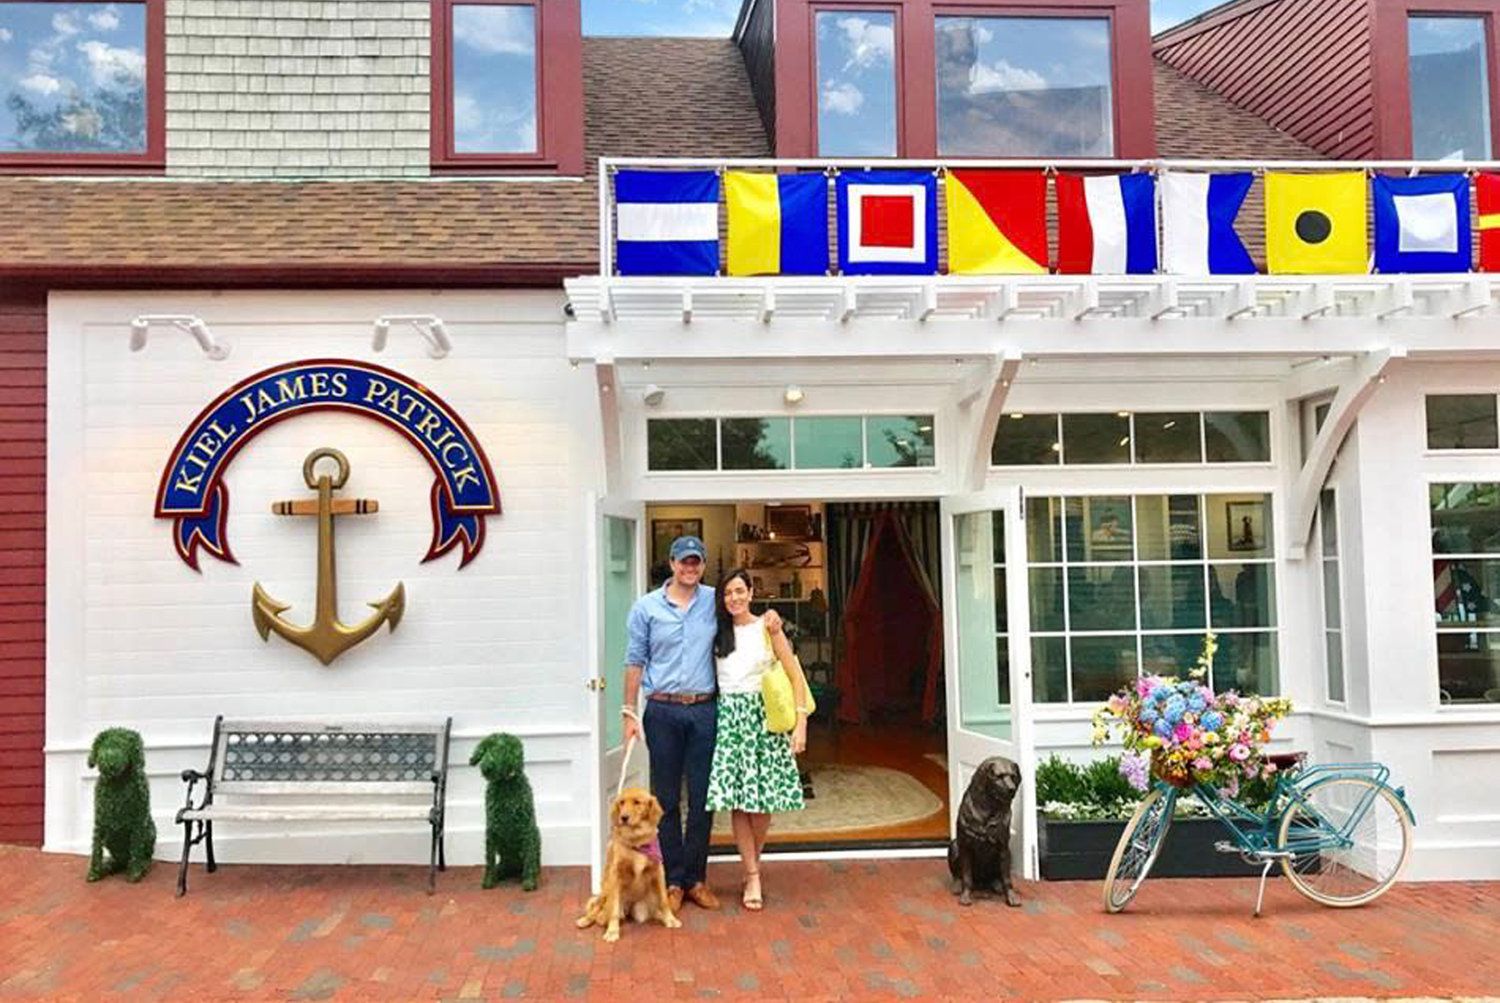 Classic New England style abounds at KJP